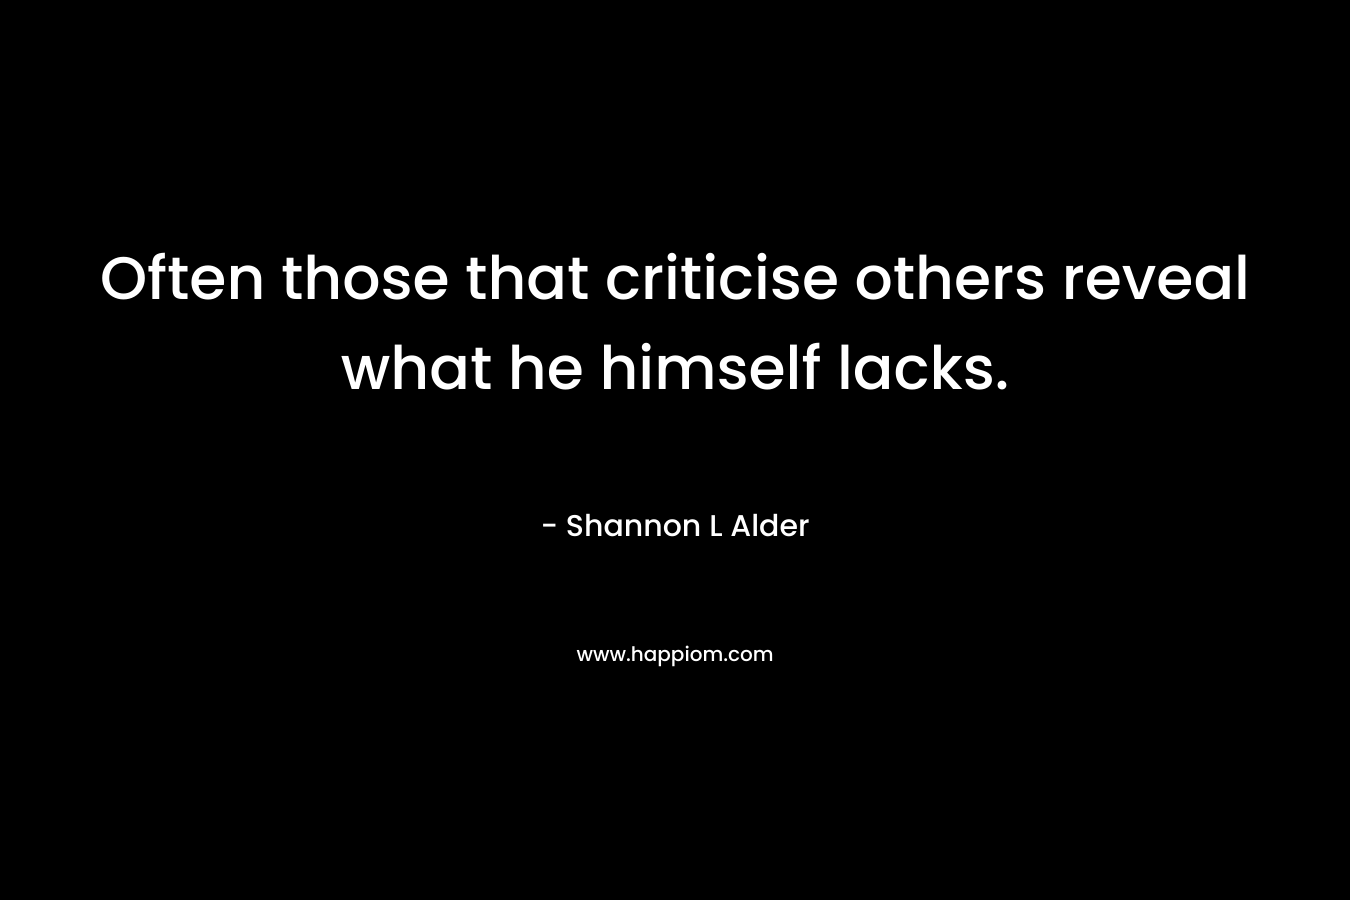 Often those that criticise others reveal what he himself lacks.